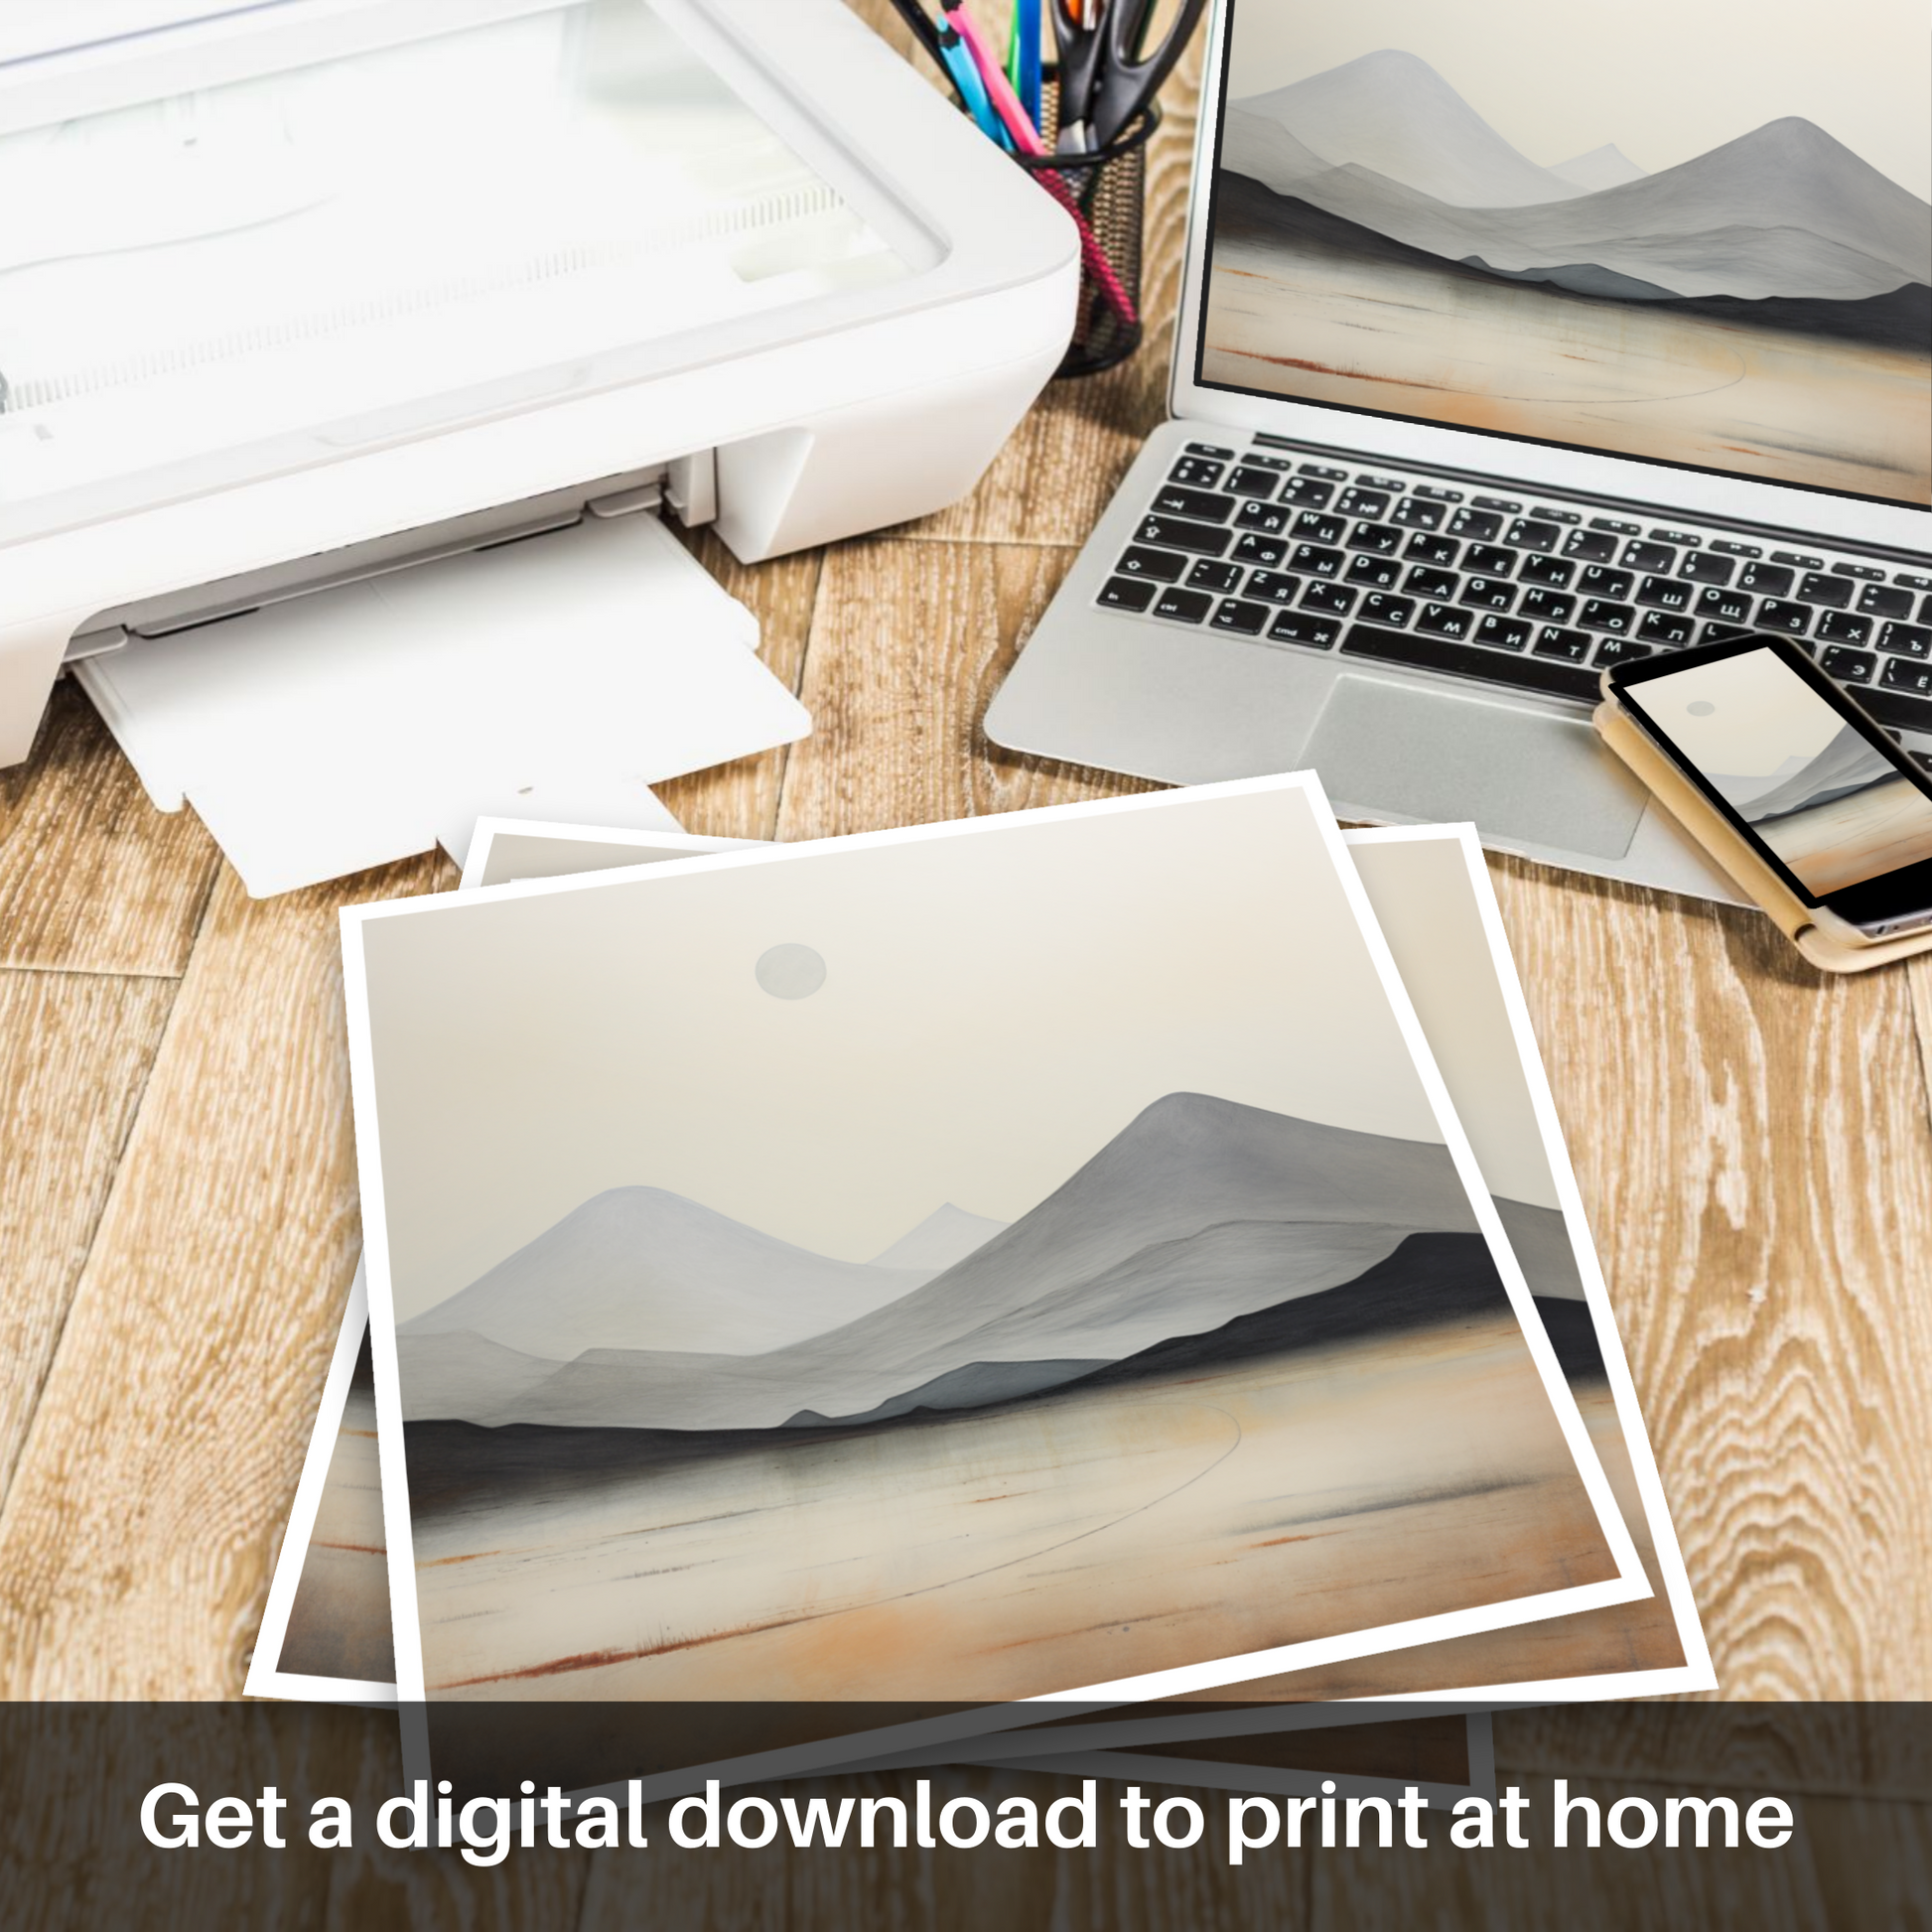 Downloadable and printable picture of Meall Greigh